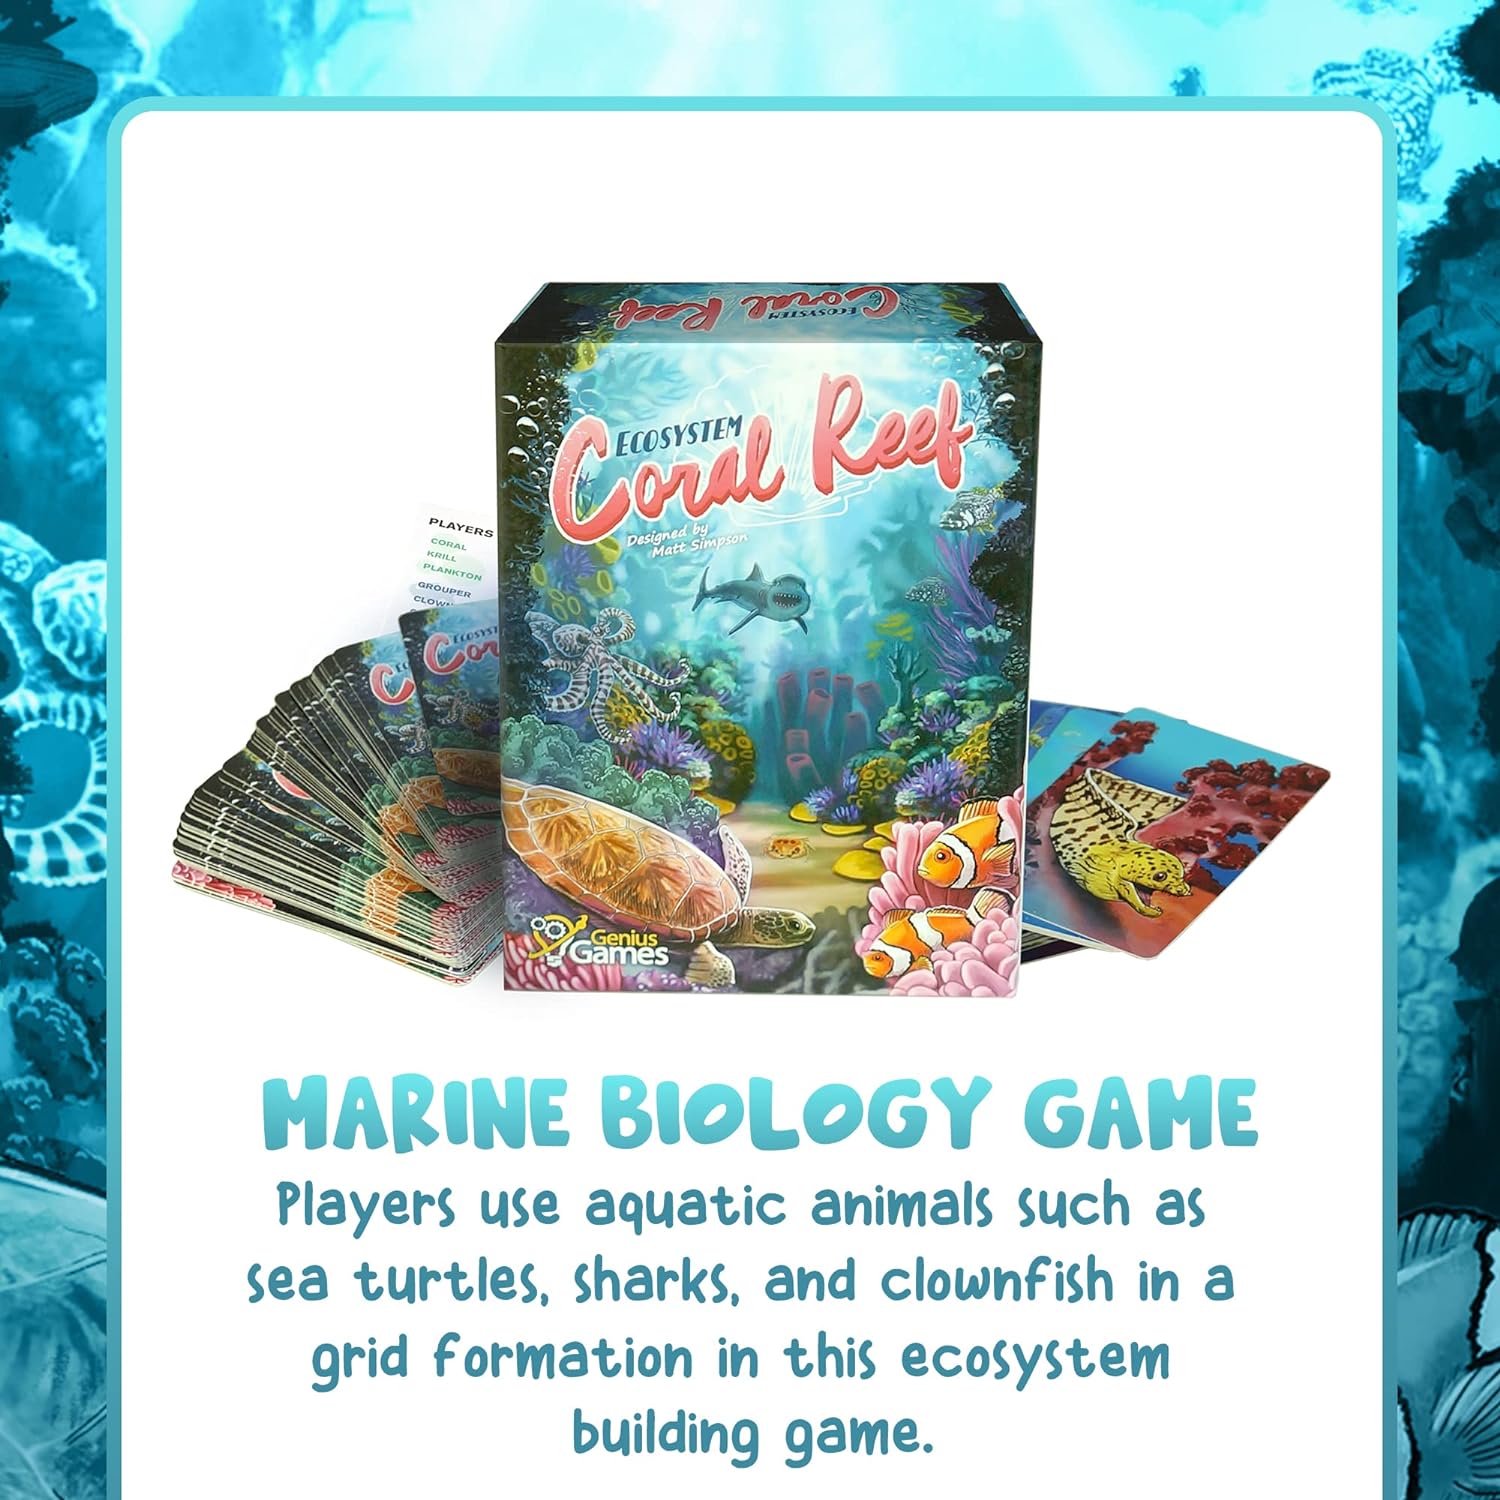 Ecosystem: Coral Reef Board Game